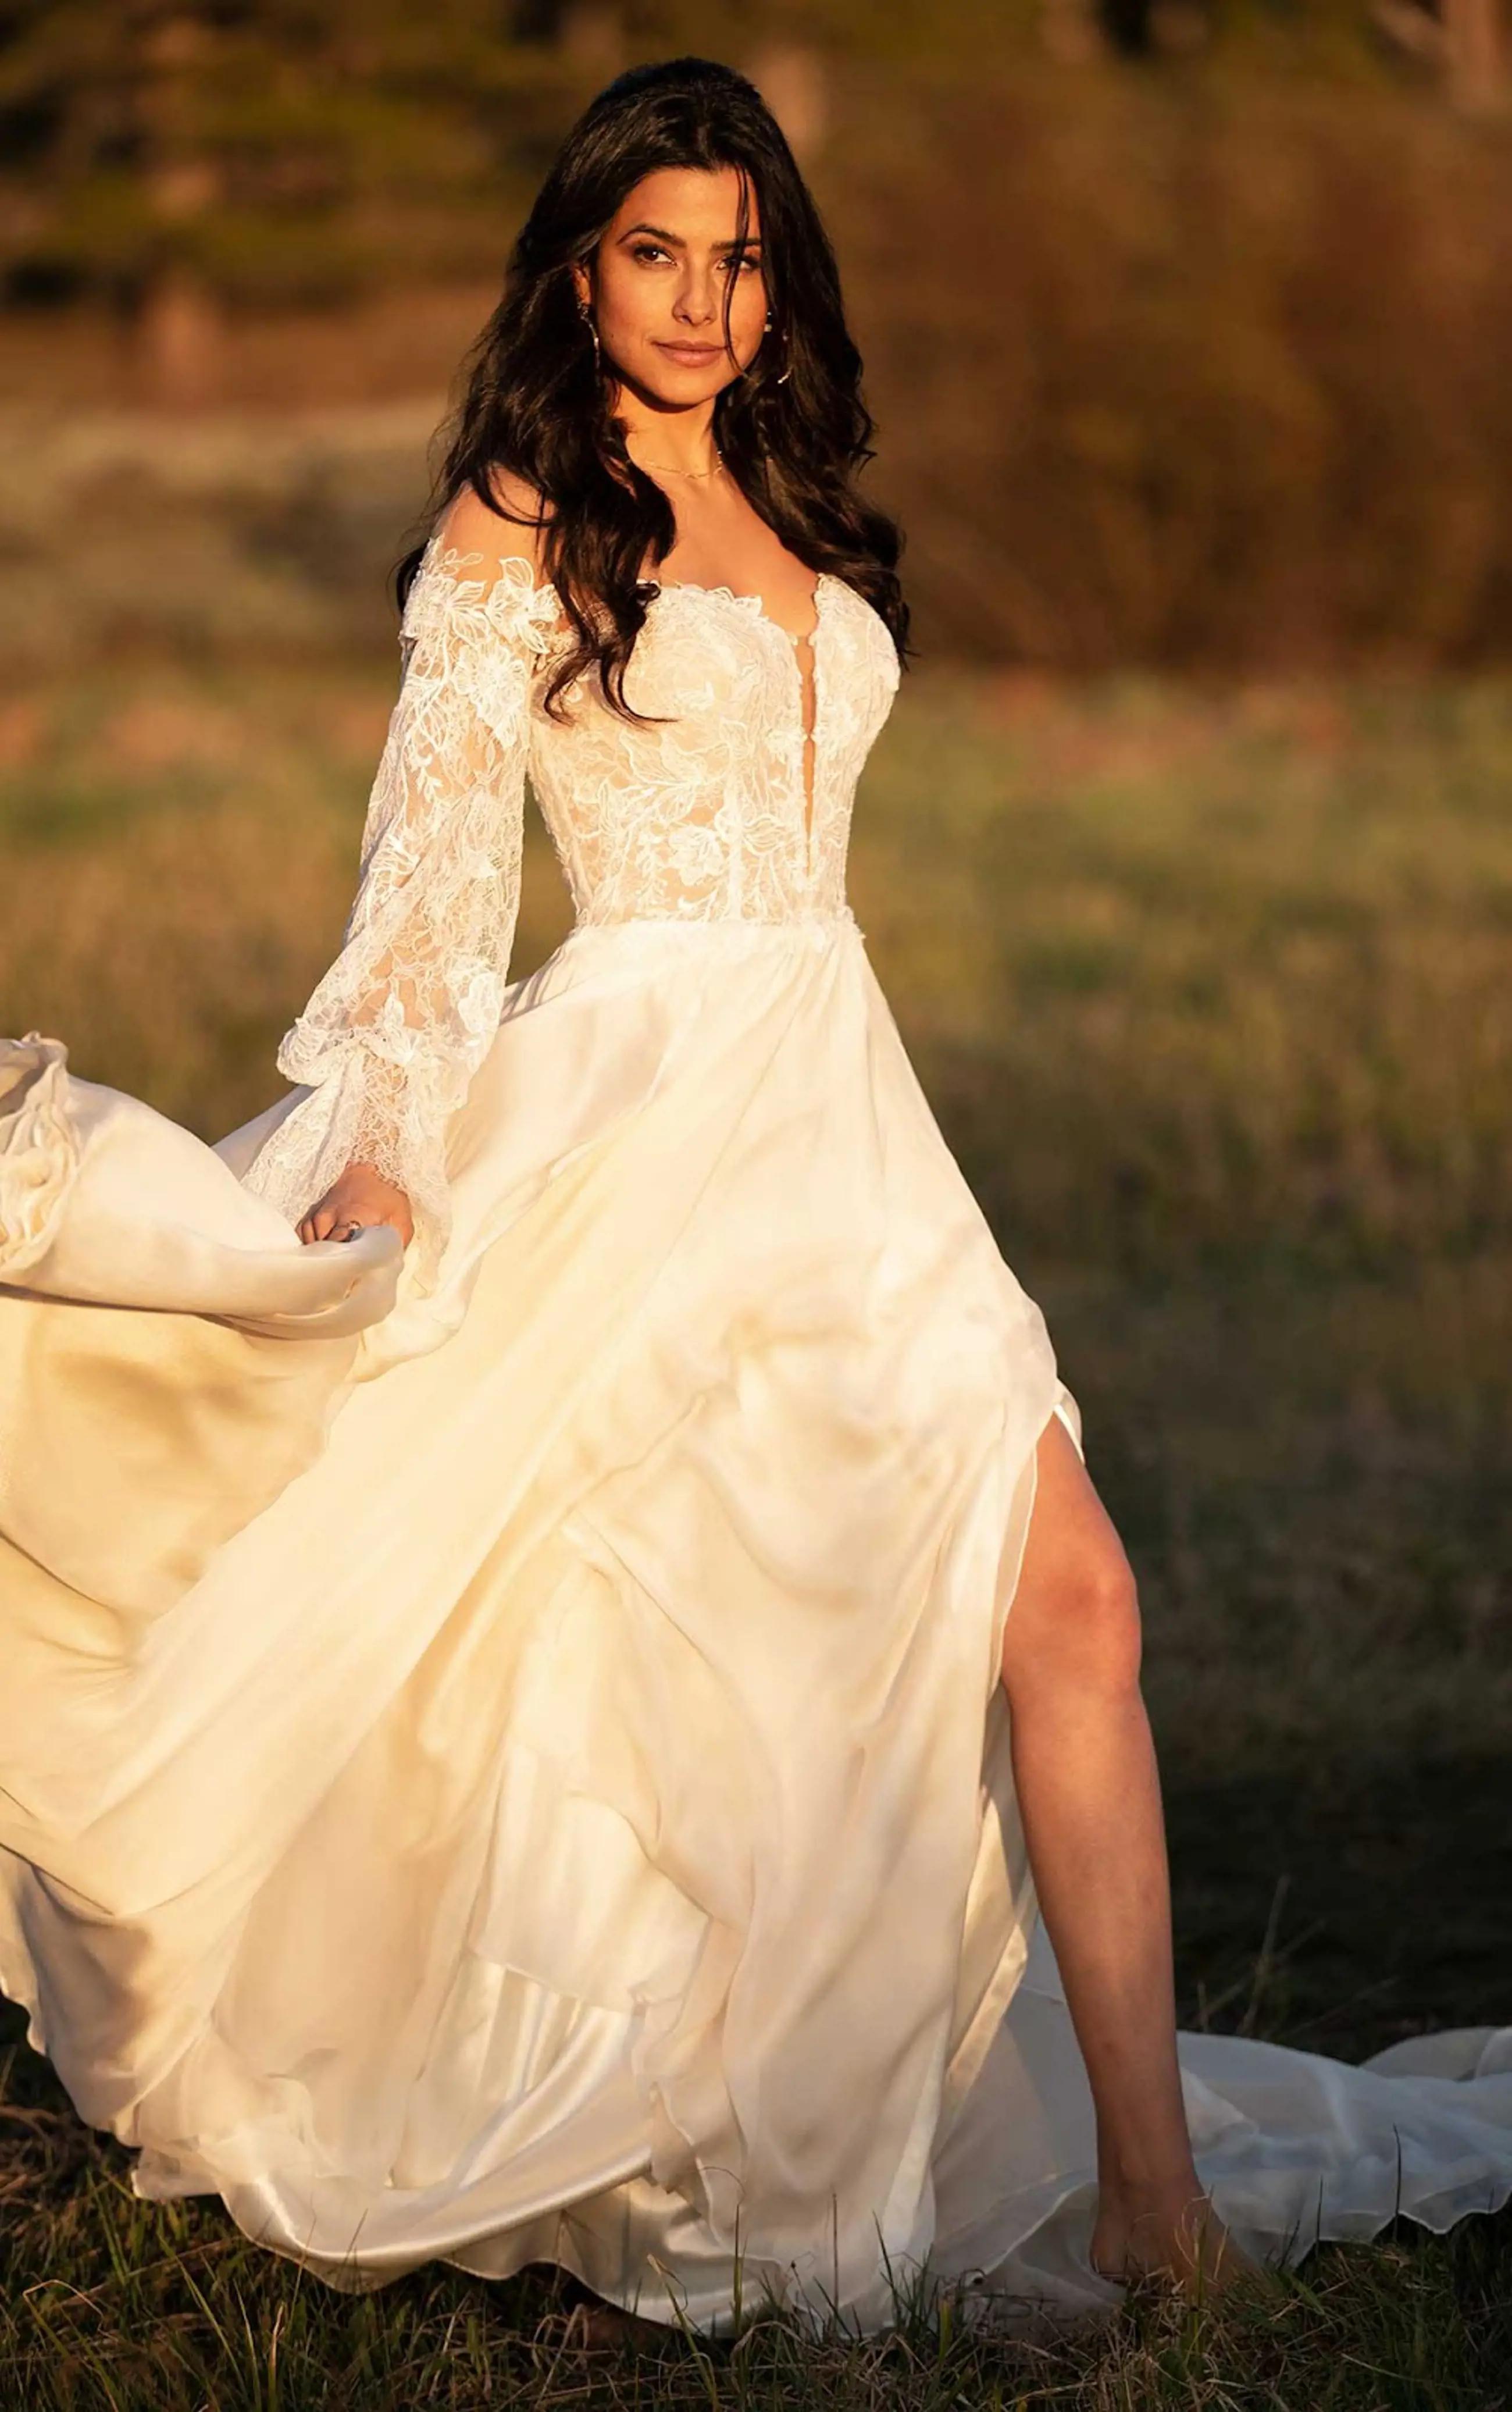 Wedding Dresses For Your Fall Wedding Image